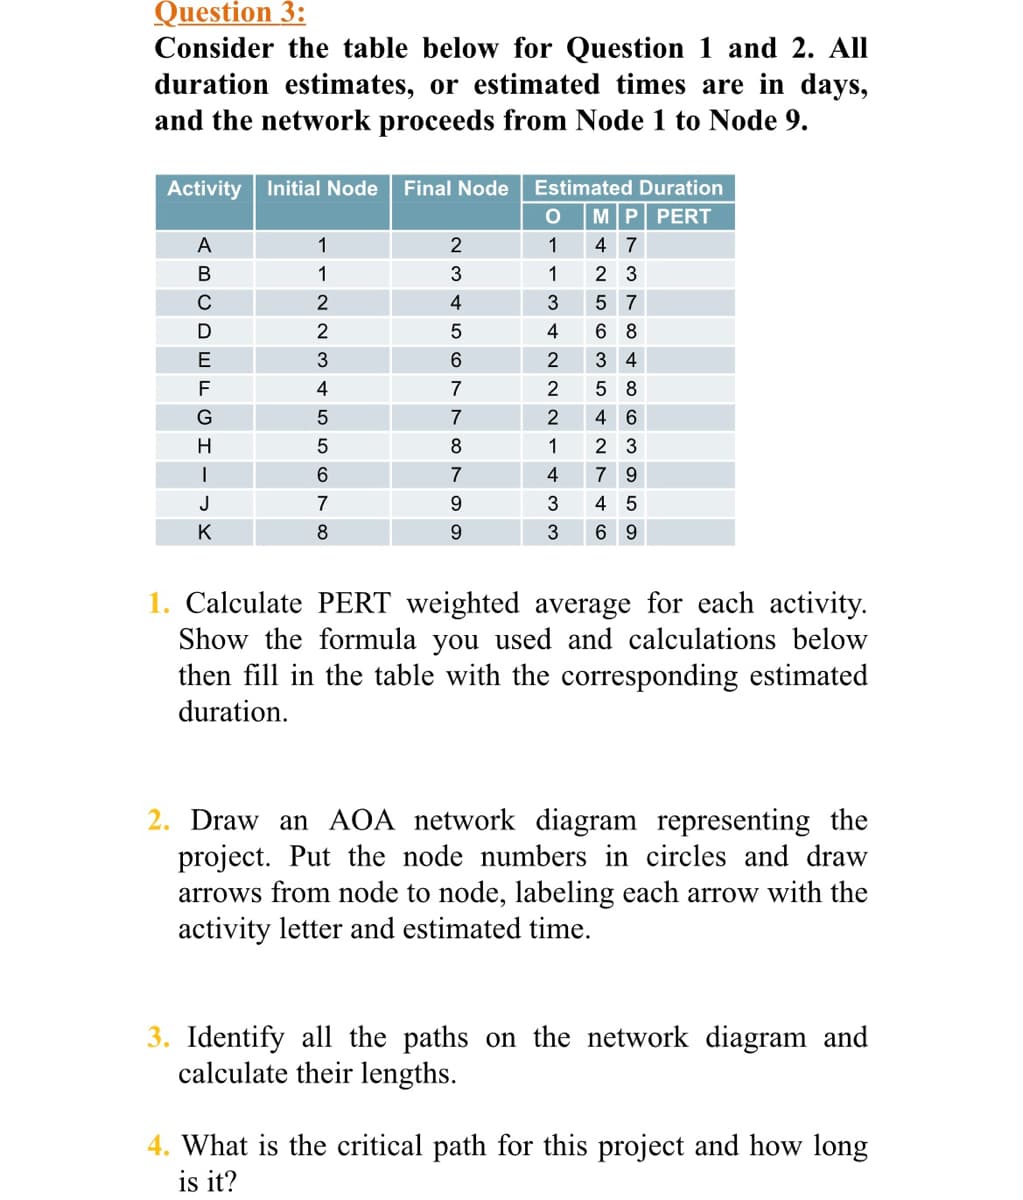 Question 3:
Consider the table below for Question 1 and 2. All
duration estimates, or estimated times are in days,
and the network proceeds from Node 1 to Node 9.
Activity Initial Node Final Node
A
B
C
D
E
F
G
H
|
J
K
1
1
2
2
3
4
5
5
6
7
8
2
3
4
5
6
7
7
8
7
9
9
Estimated Duration
O MP PERT
1 47
1
23
3
5 7
4
6 8
2 3 4
2
2
1
4
3
3
58
4 6
2 3
79
4 5
6 9
1. Calculate PERT weighted average for each activity.
Show the formula you used and calculations below
then fill in the table with the corresponding estimated
duration.
2. Draw an AOA network diagram representing the
project. Put the node numbers in circles and draw
arrows from node to node, labeling each arrow with the
activity letter and estimated time.
3. Identify all the paths on the network diagram and
calculate their lengths.
4. What is the critical path for this project and how long
is it?